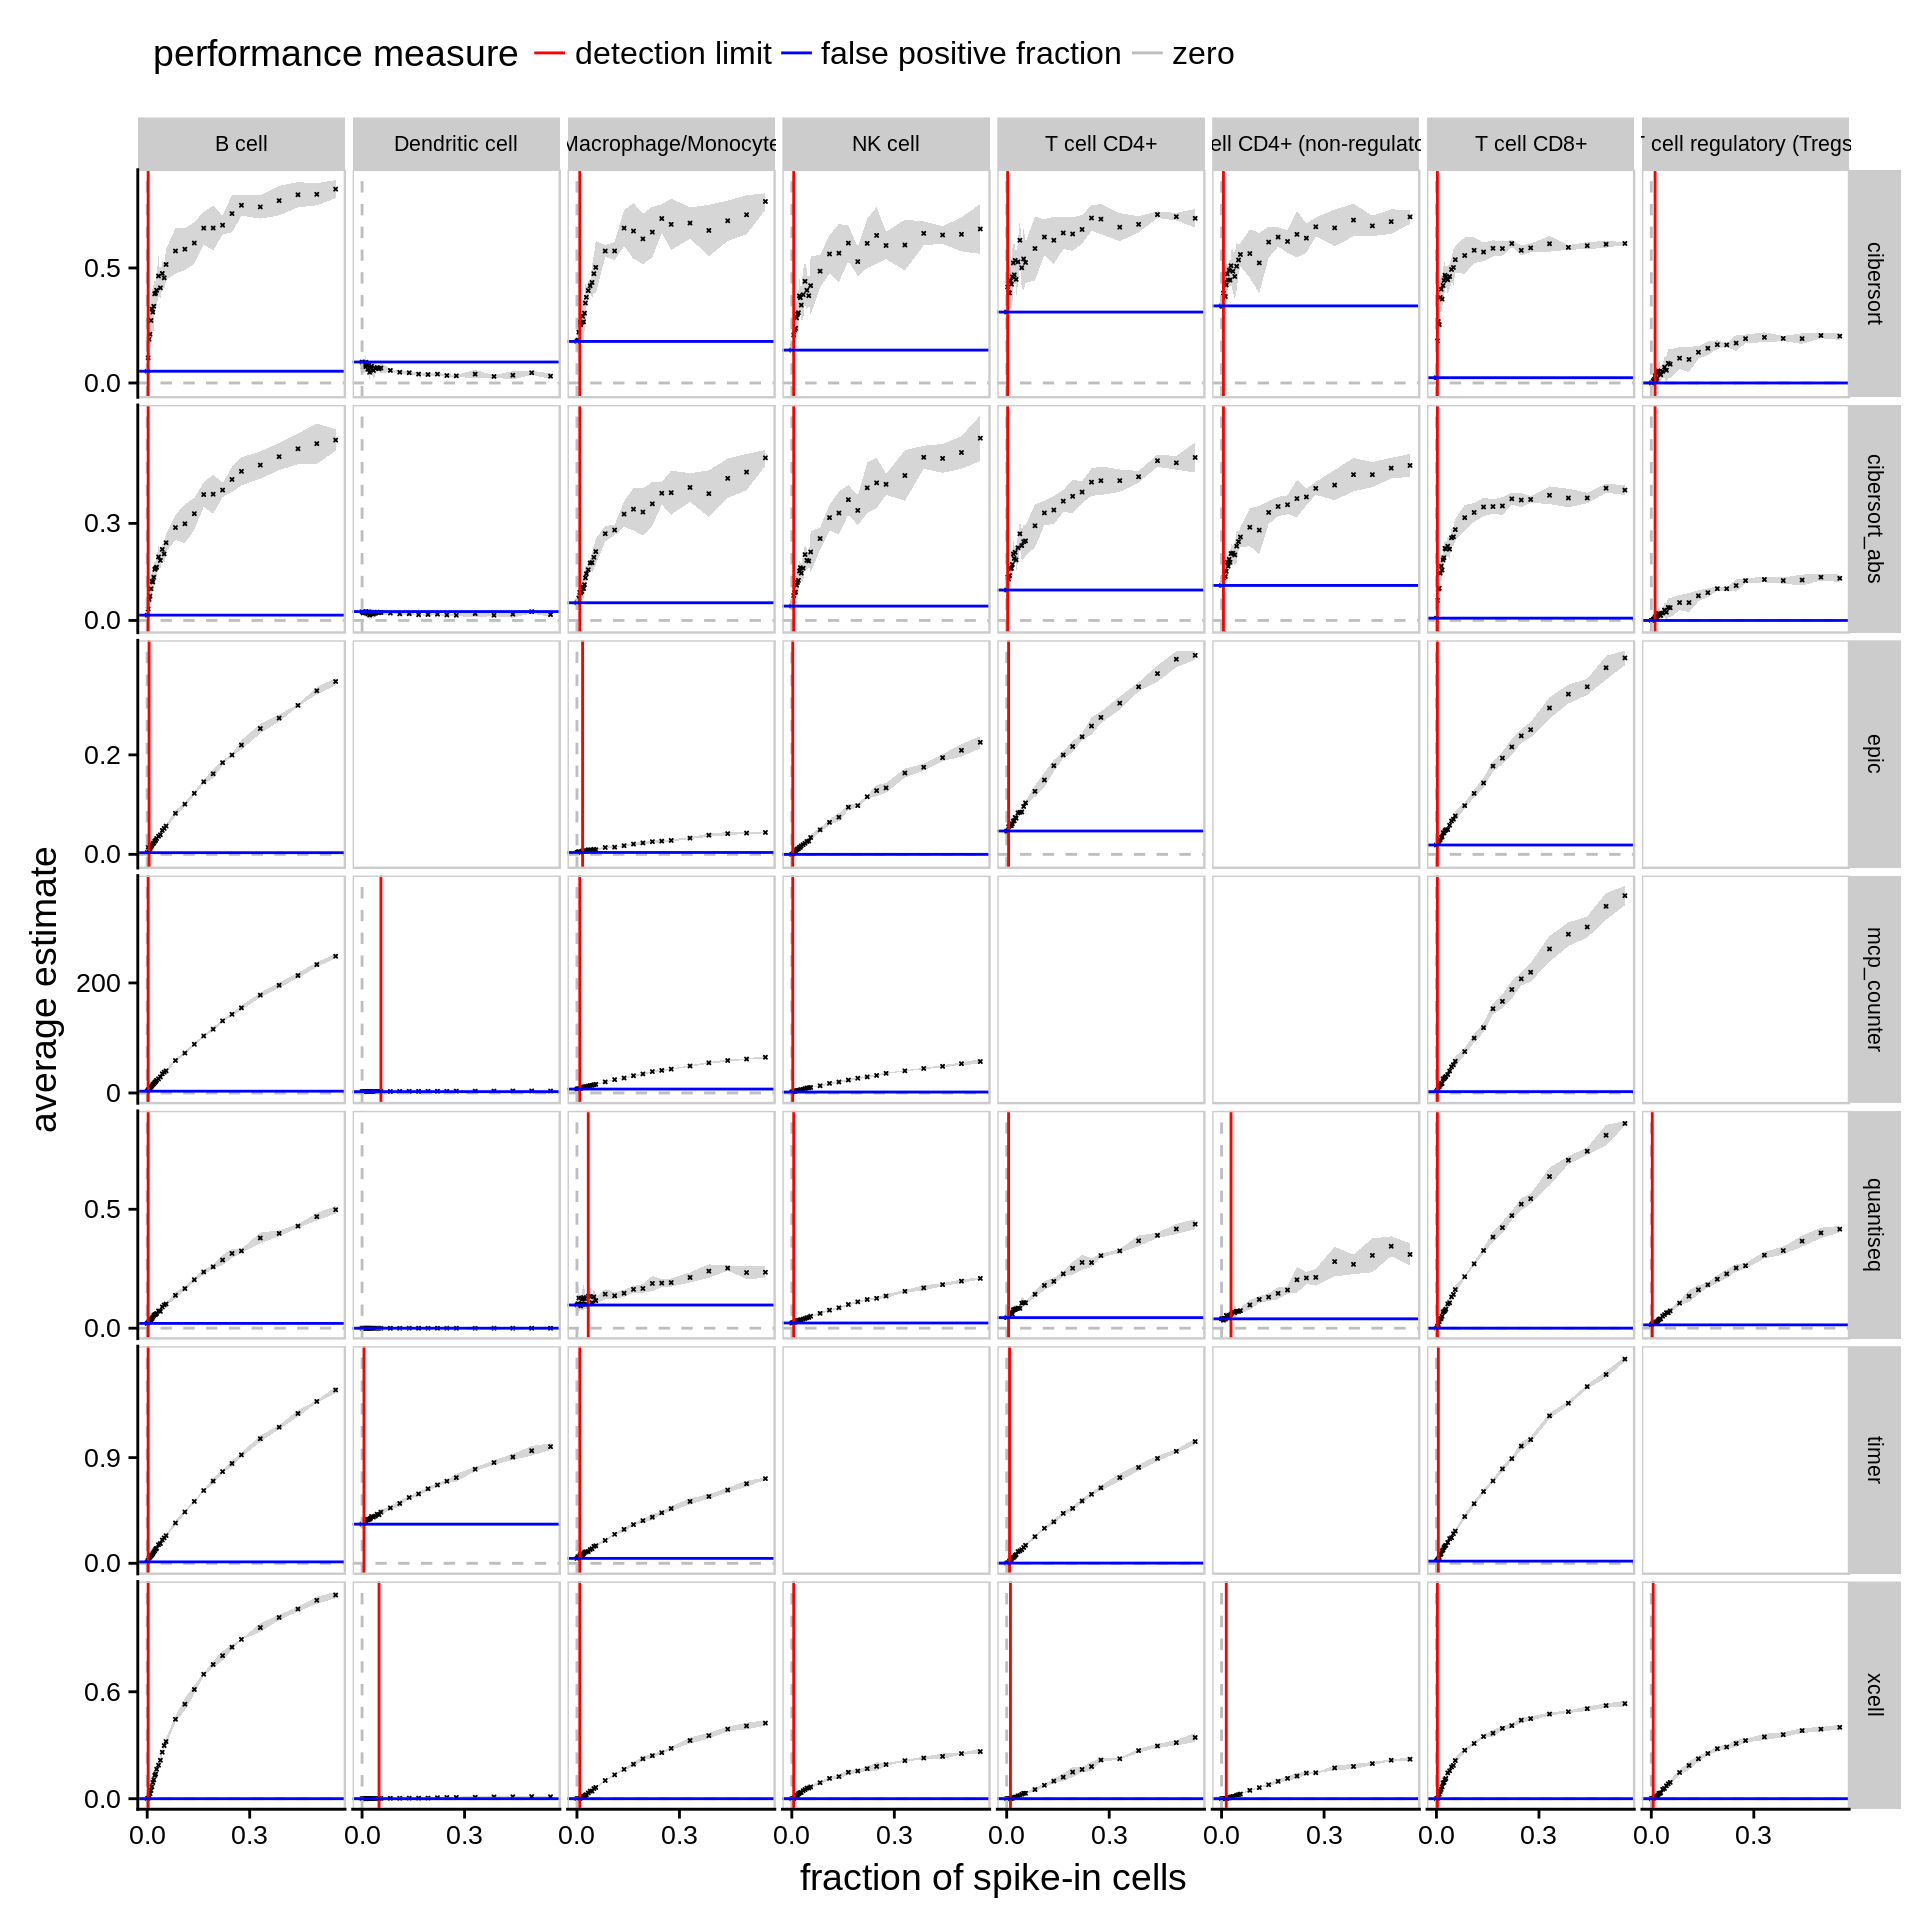 Detection limit and false positive predictions. The plots show the average estimate of each method for five simulated bulk RNA-seq datasets randomly sampled from ~1,800 non-immune cells and an increasing fraction of a specific immune cell type. The grey ribbon indicates the standard deviation. The red line refers to the detection limit, i.e. the minimal fraction of an immune cell type needed for a method to reliably detect its abundance as significantly different from zero (p-value < 0.05, two-sided t-test). The blue line refers to the false-positive prediction rate, i.e. the average estimate of a method with no immune cells present. 